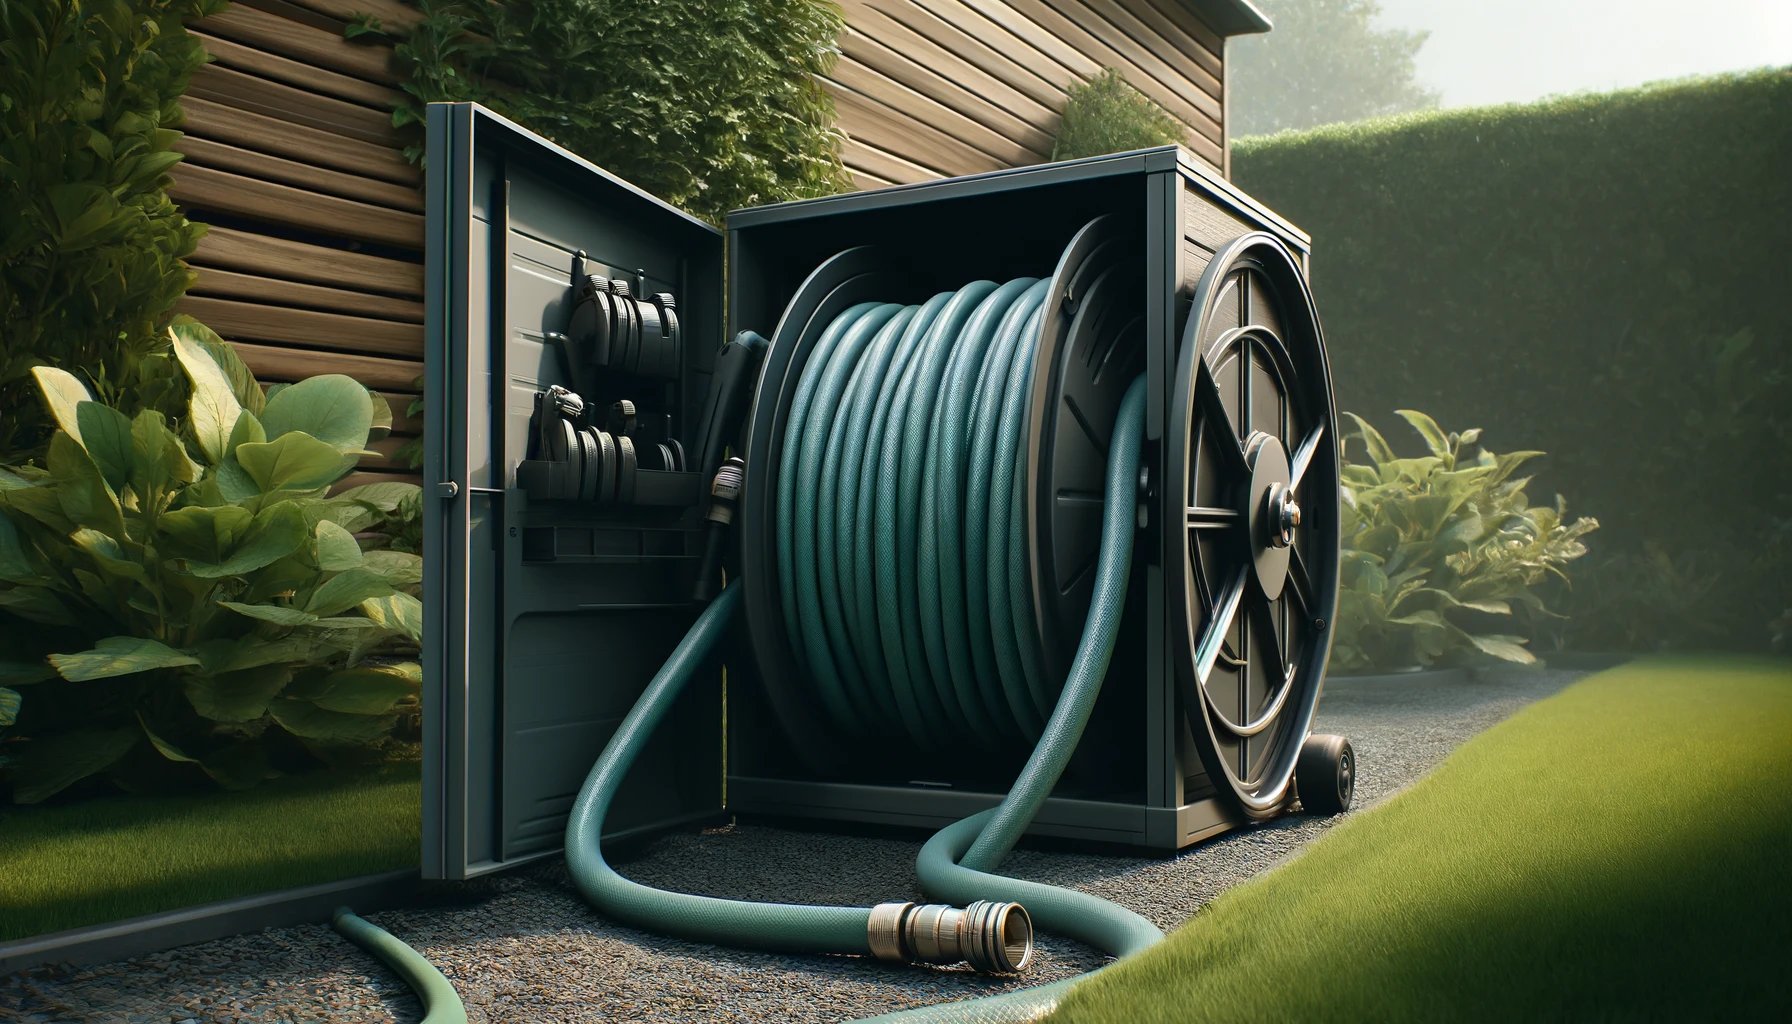 DALL·E 2024-04-26 13.47.01 - Create a realistic digital banner, 1792x1024, emphasizing a garden hose being placed into a high-quality storage solution in a residential garden. The